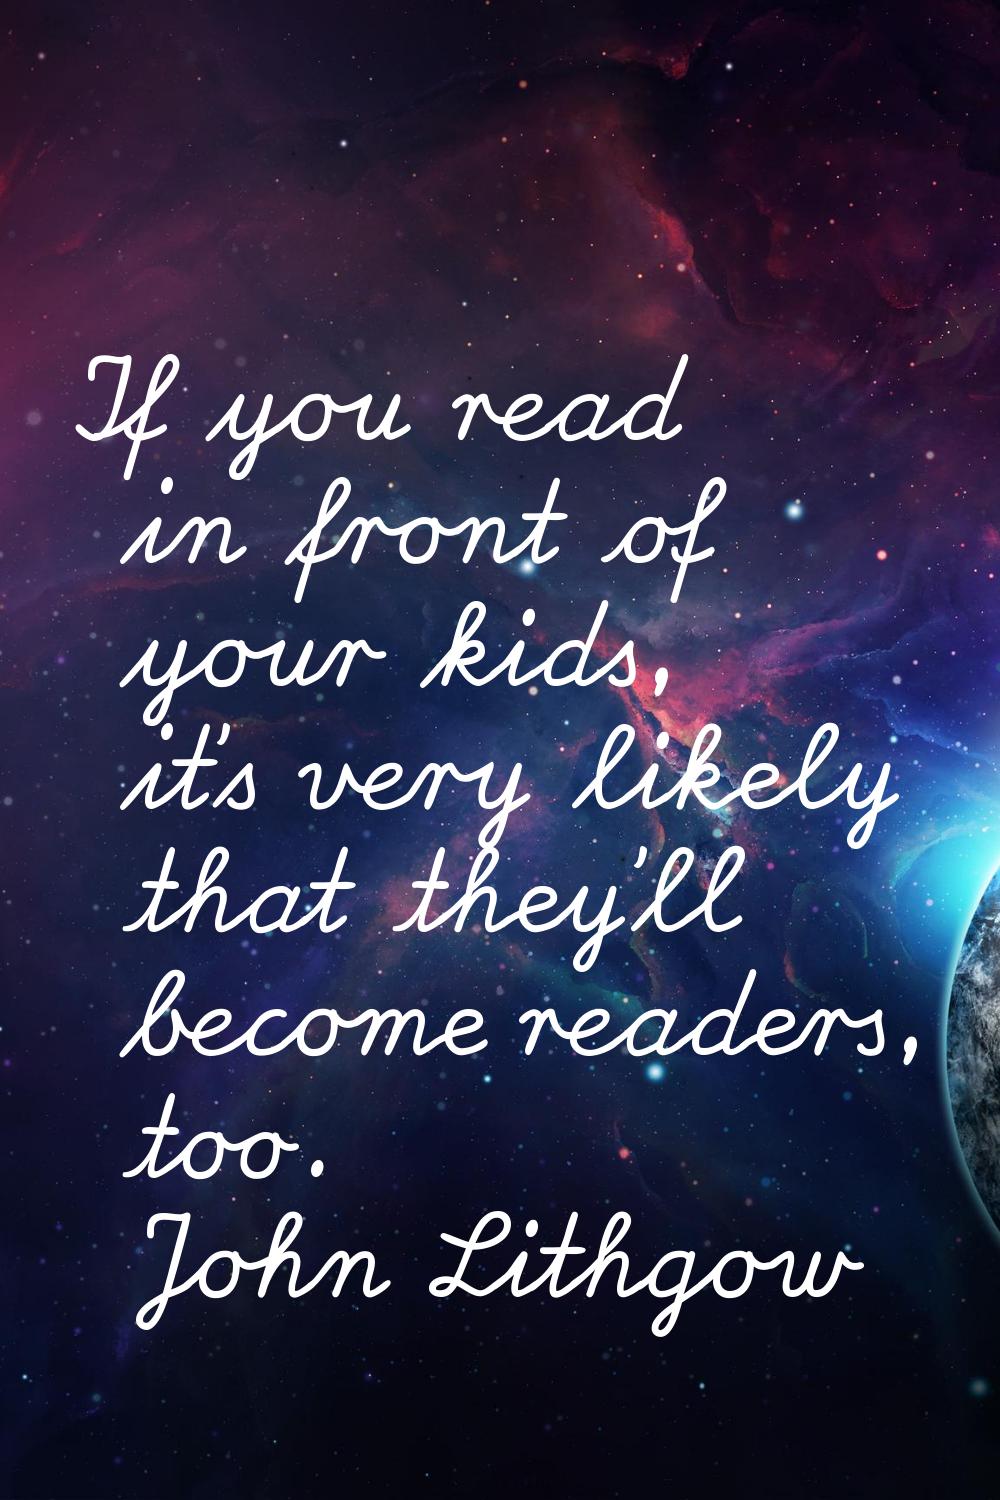 If you read in front of your kids, it's very likely that they'll become readers, too.